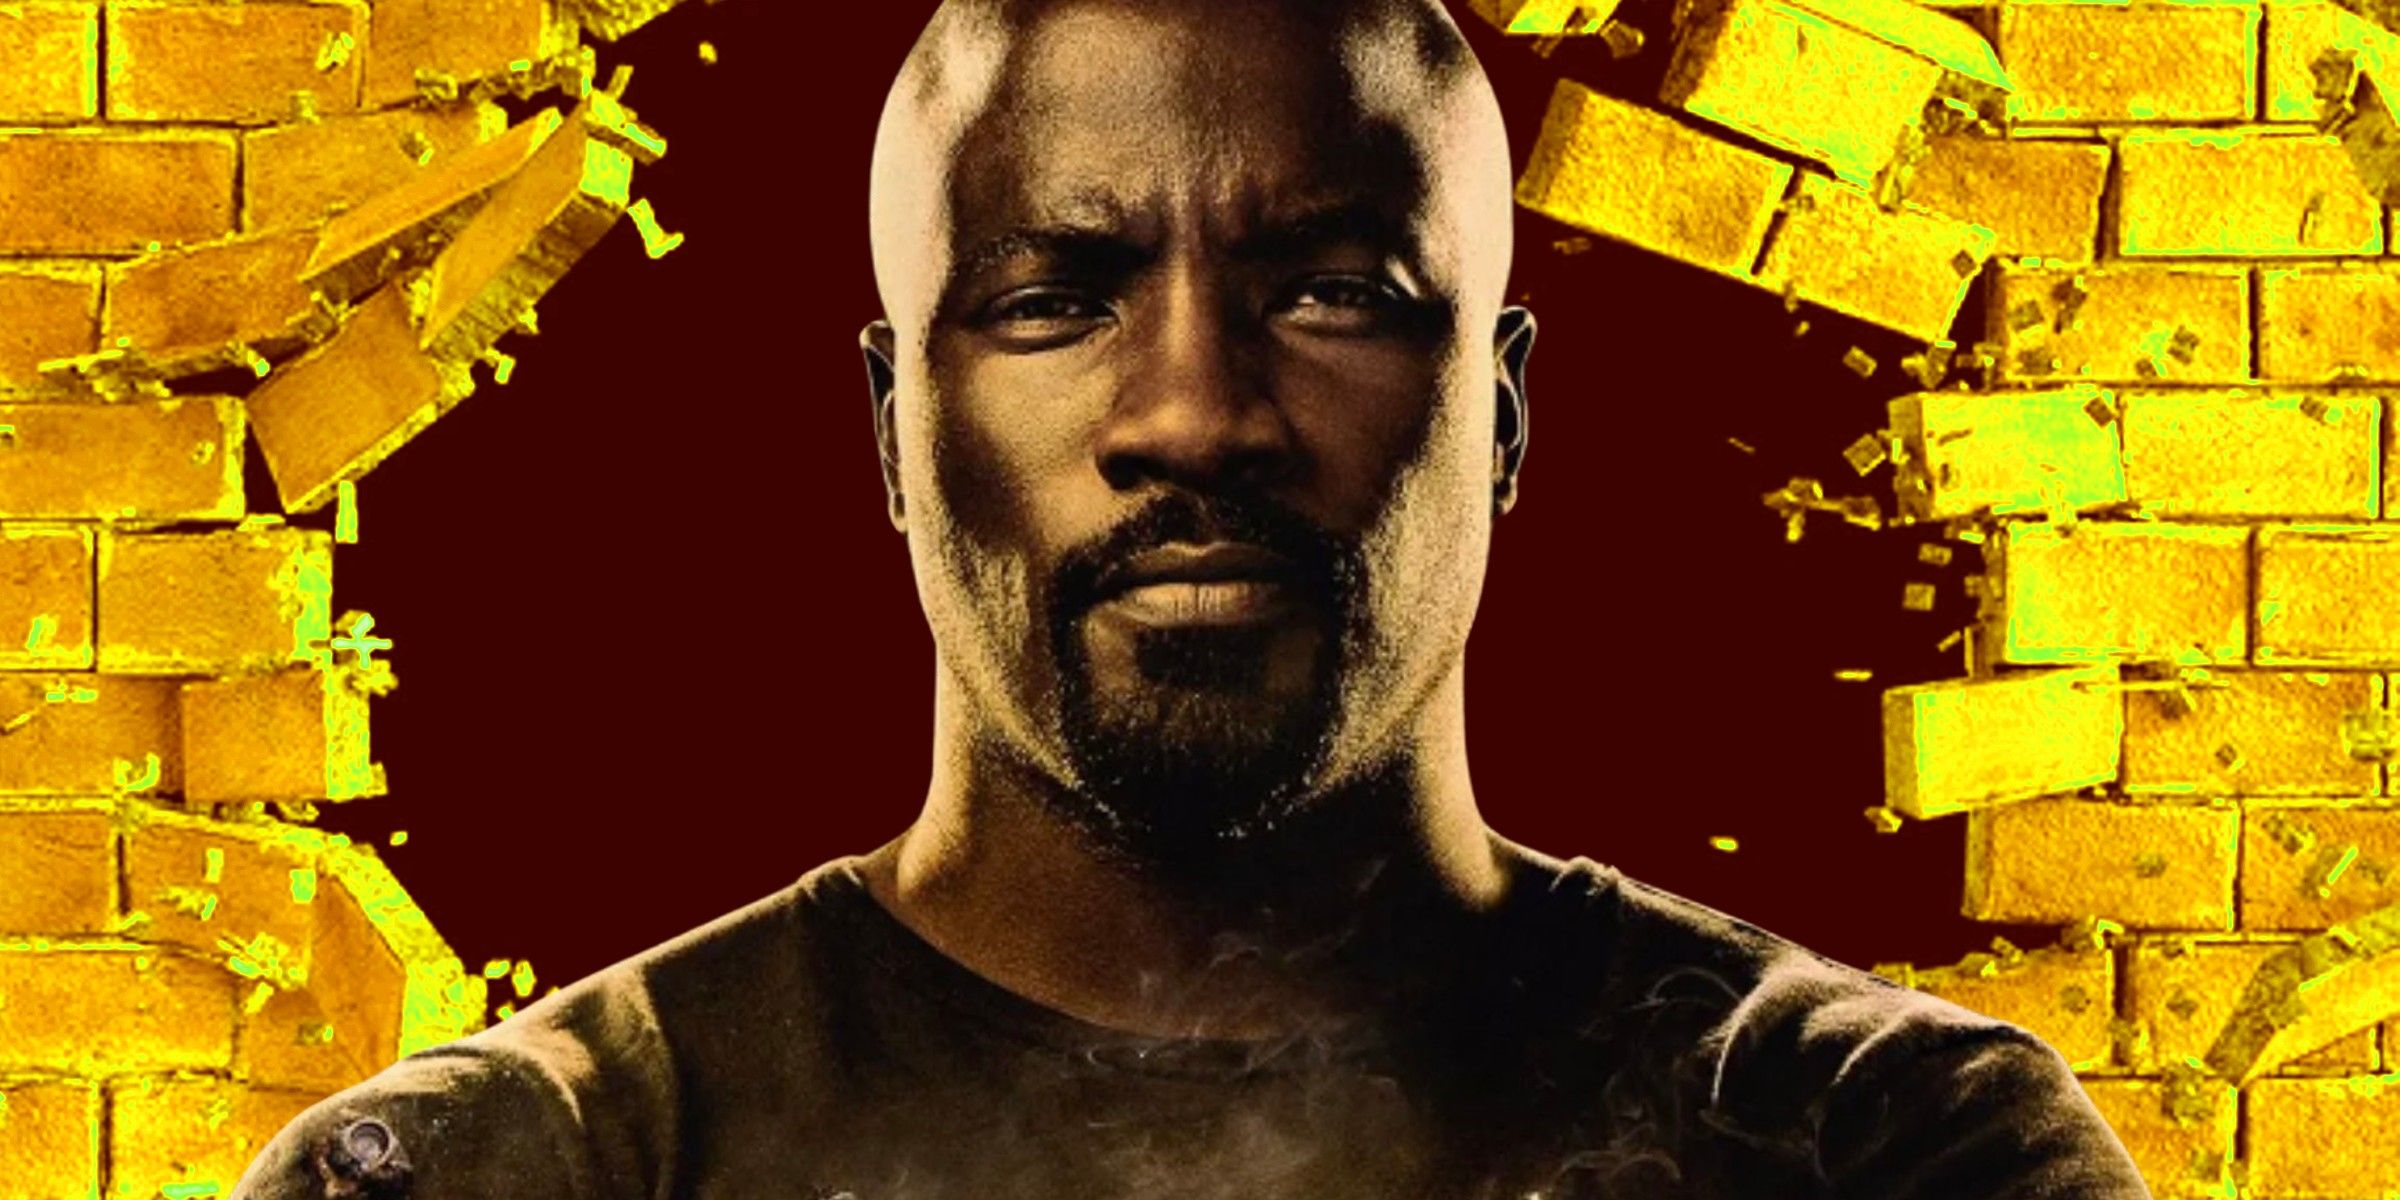 Your Dream MCU Luke Cage Recasting Wanted The Role In 2011